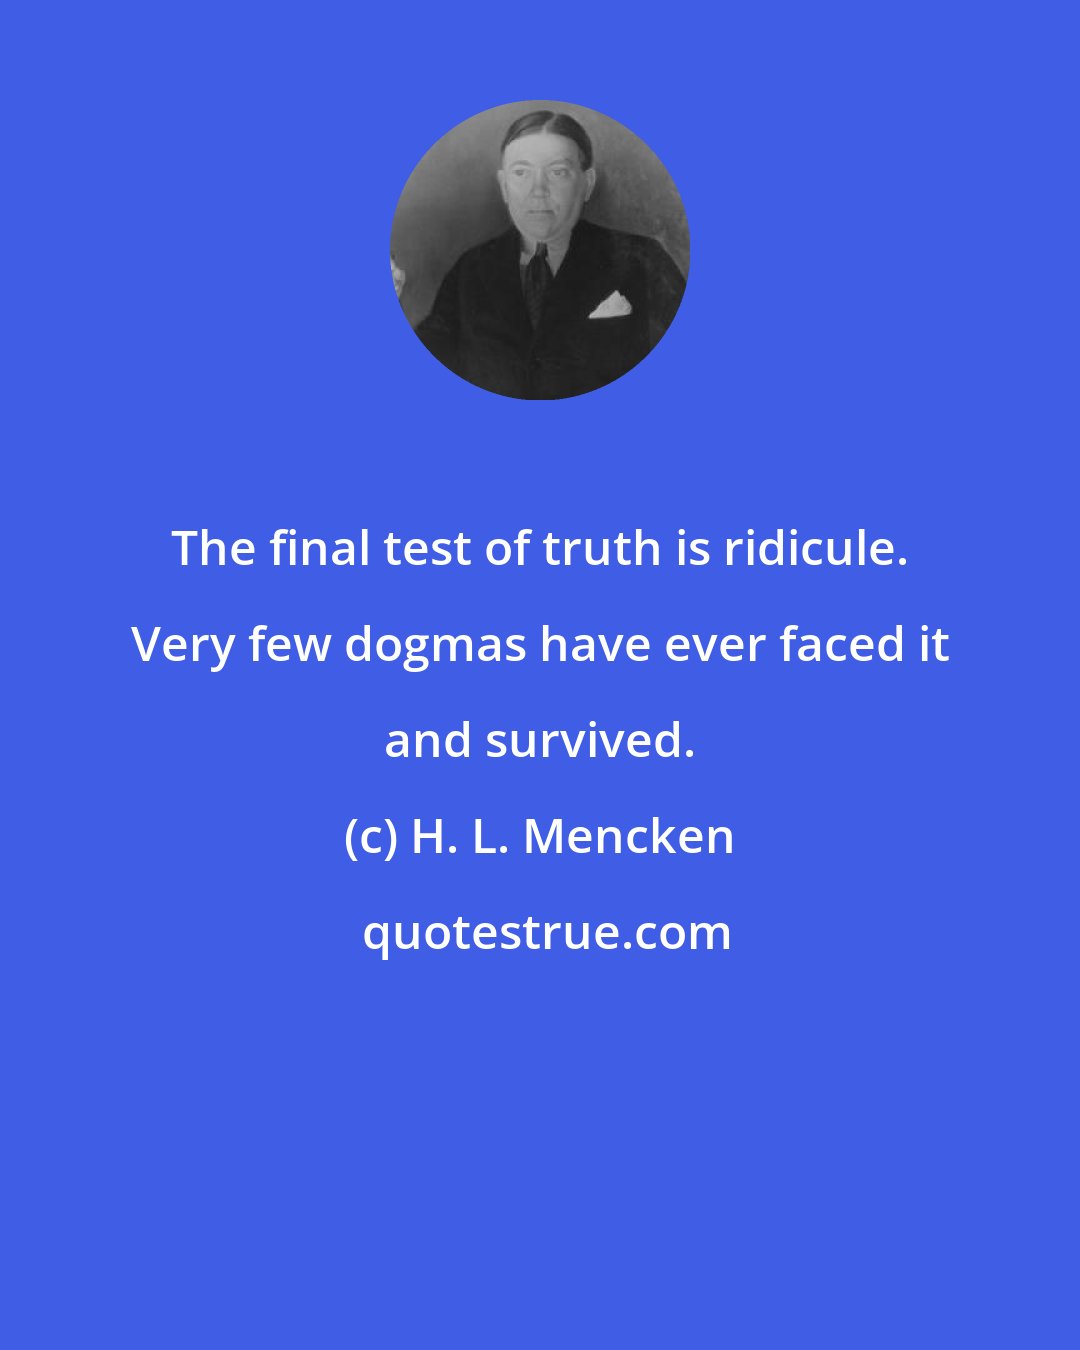 H. L. Mencken: The final test of truth is ridicule. Very few dogmas have ever faced it and survived.